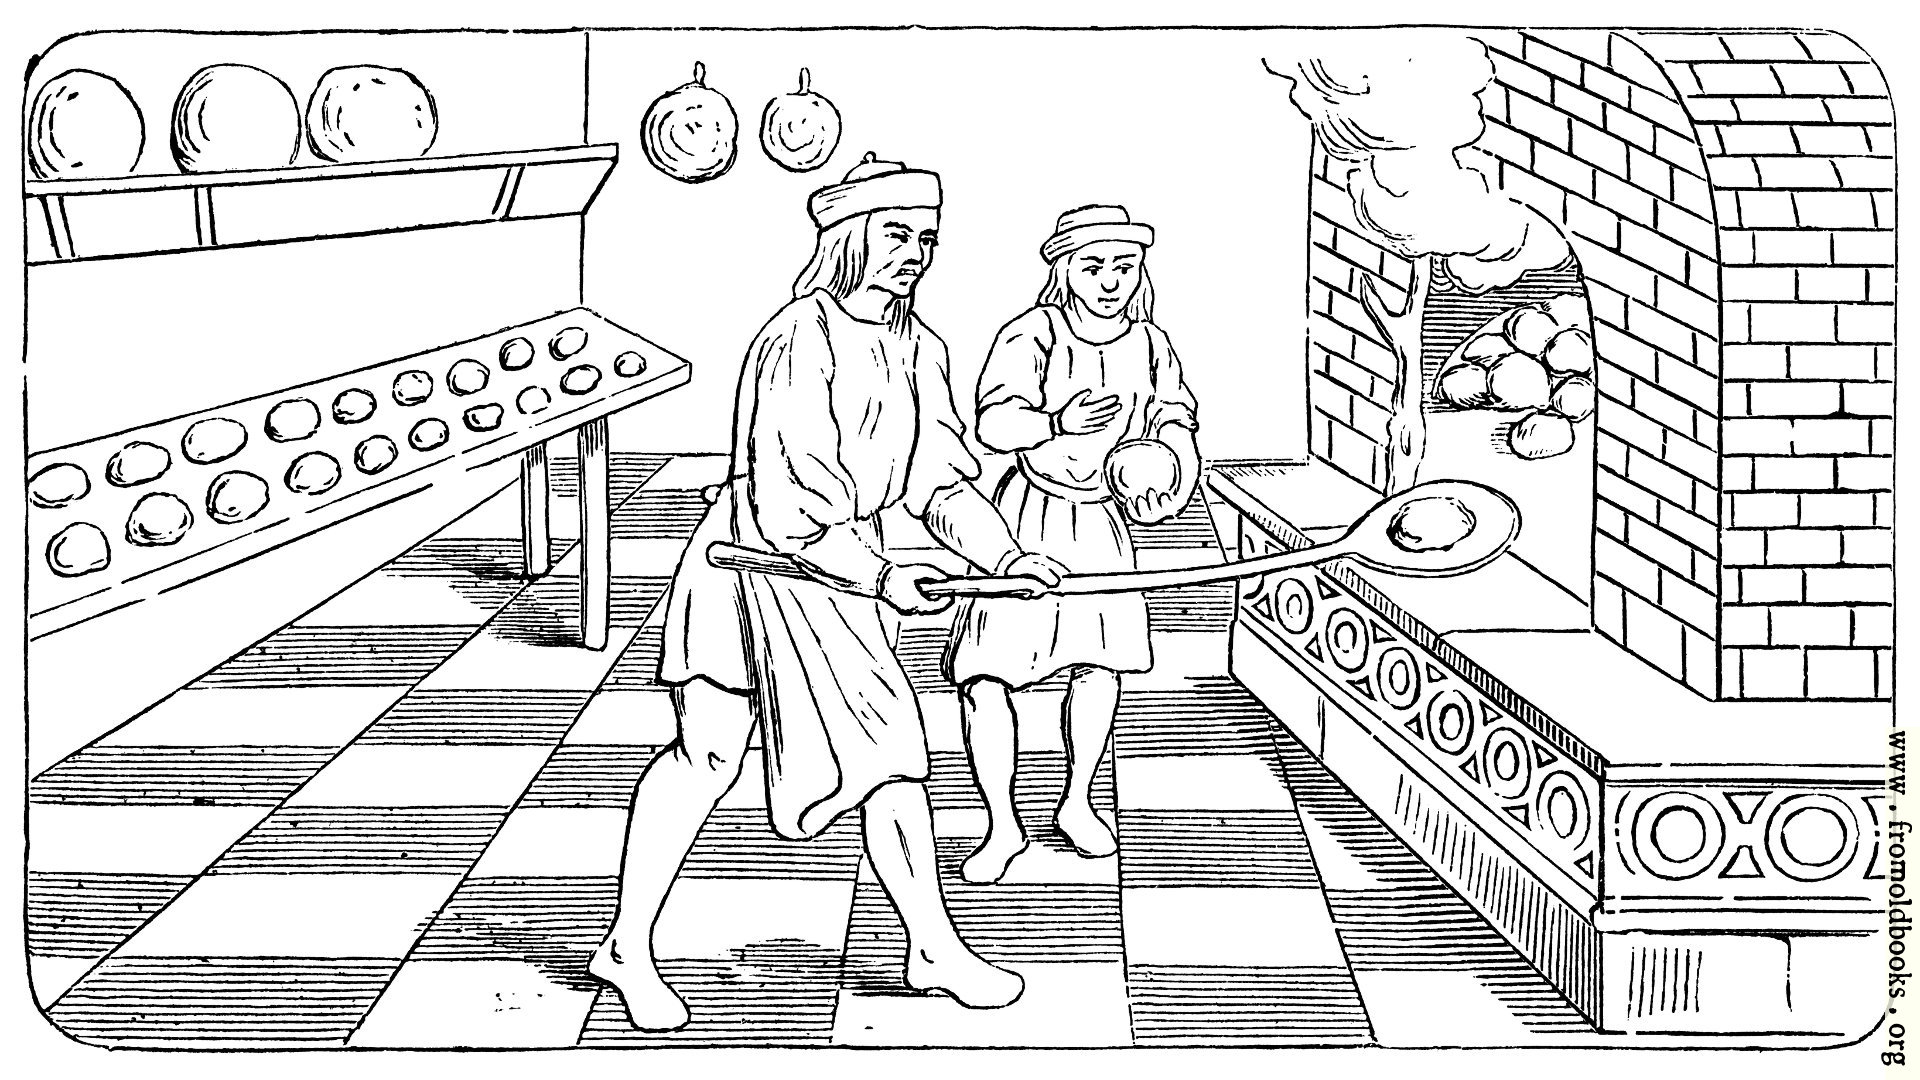 [Picture: Bakehouse of the Fifteenth Century]